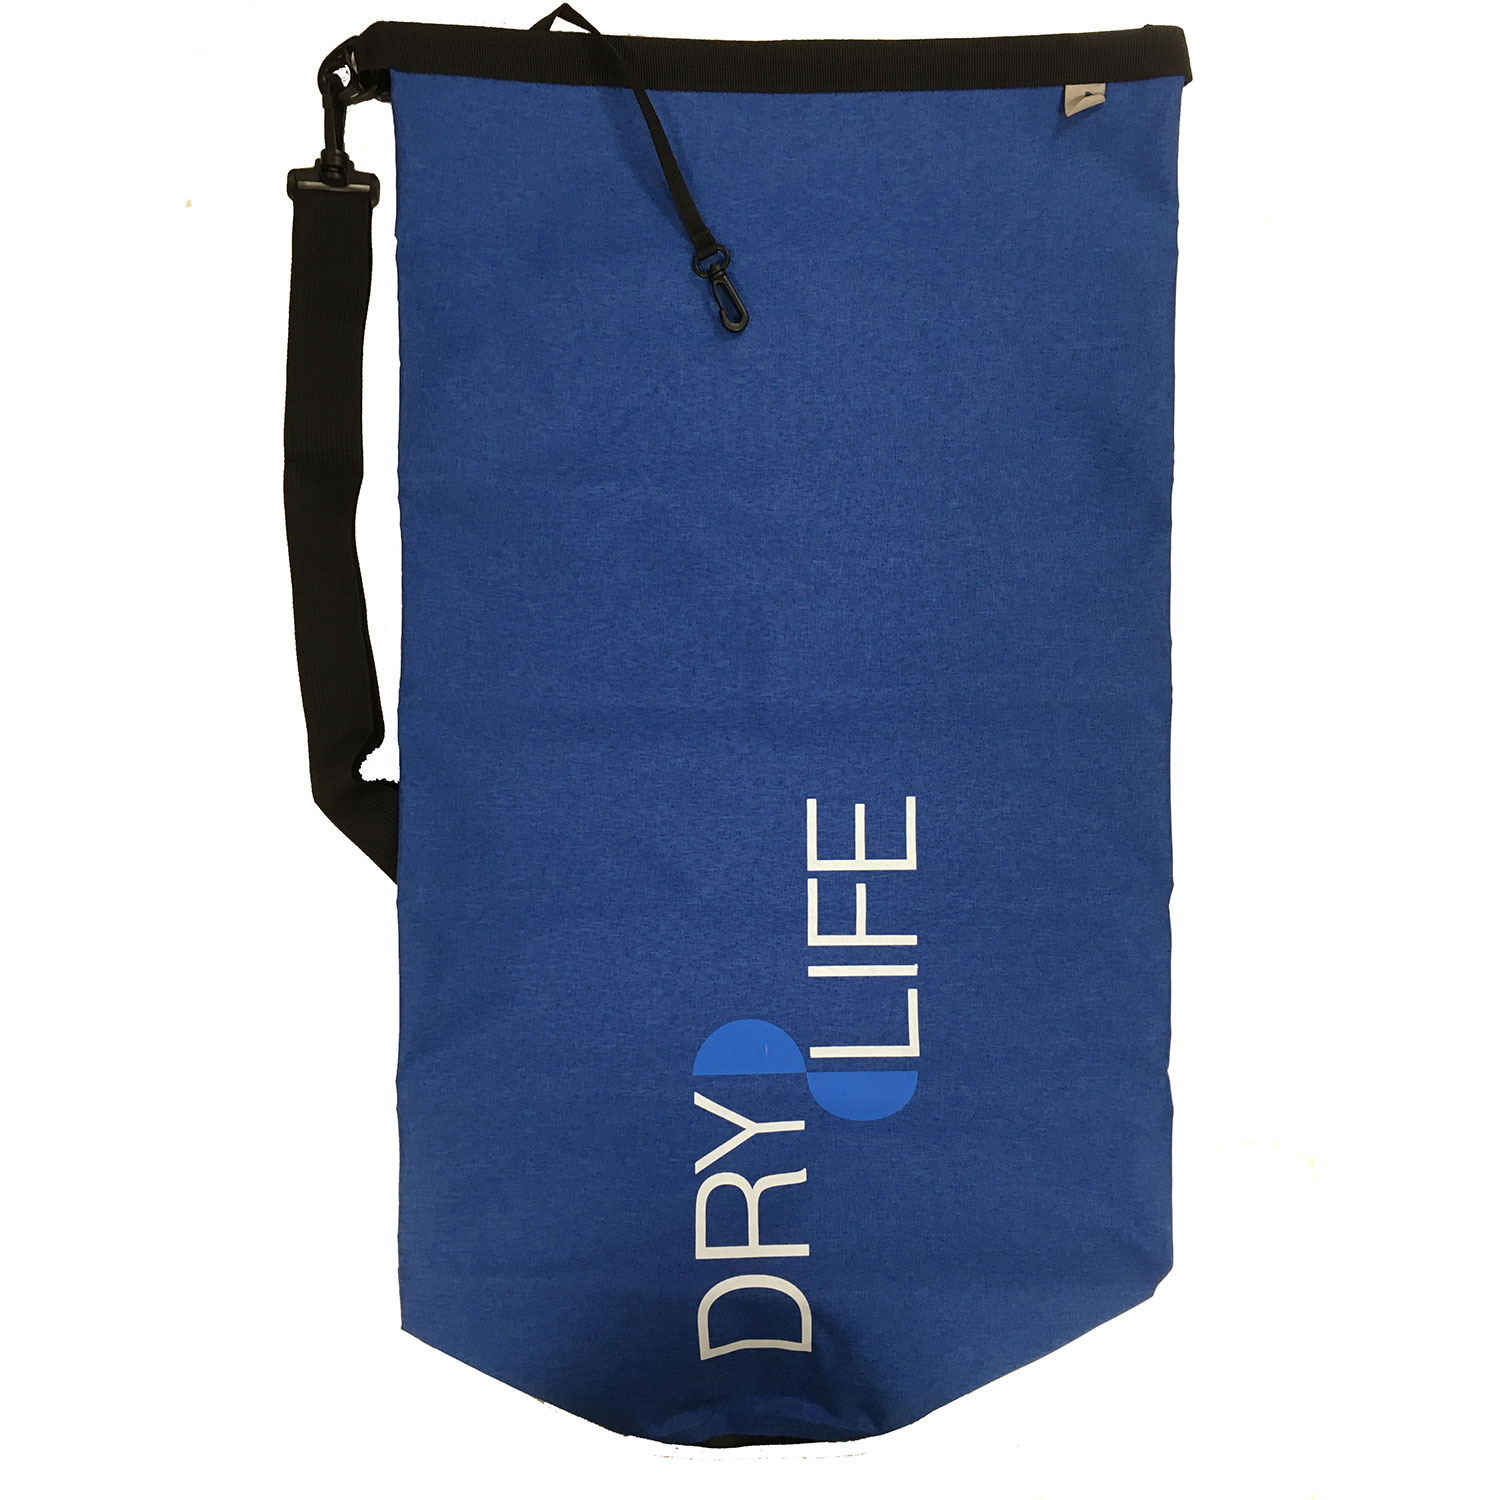 dry life bags